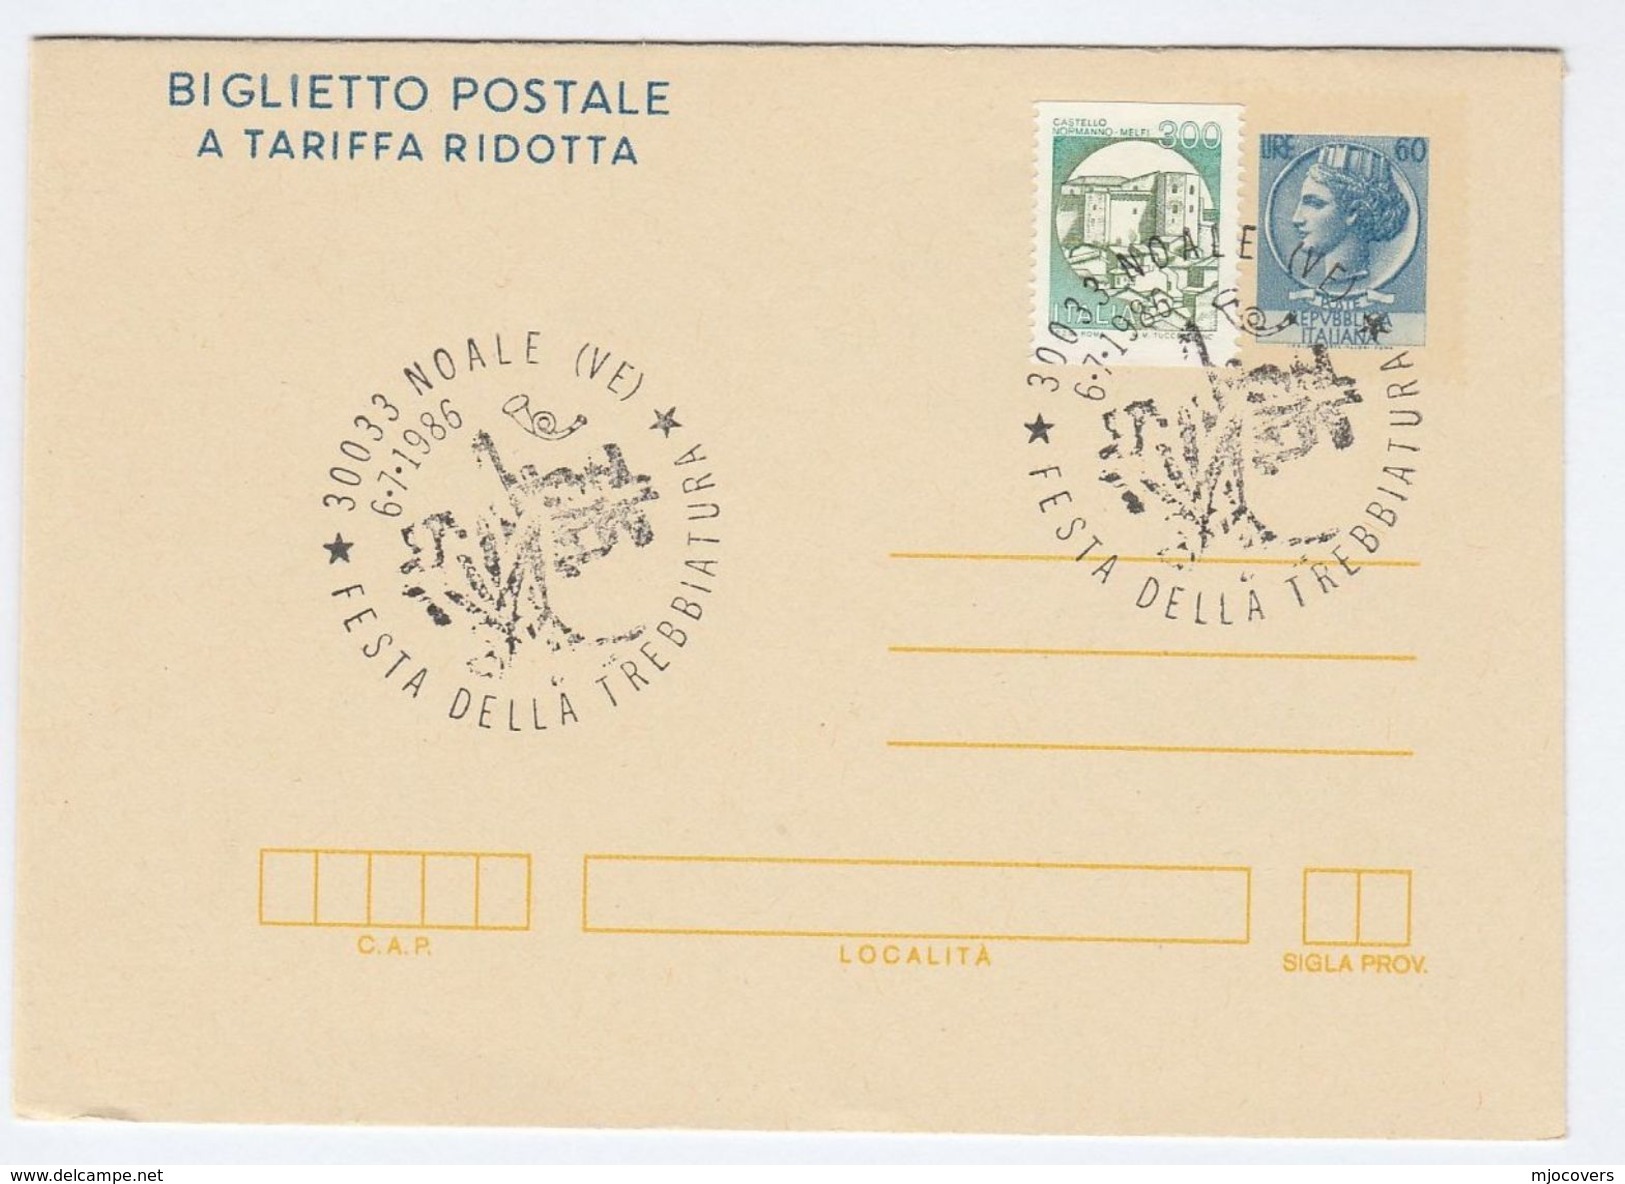 1986 NOALE THRESHING FESTIVAL  EVENT Postal STATIONERY LETTERSHEET Italy Stamps Uprated Cover Agriculture Farming - Landwirtschaft